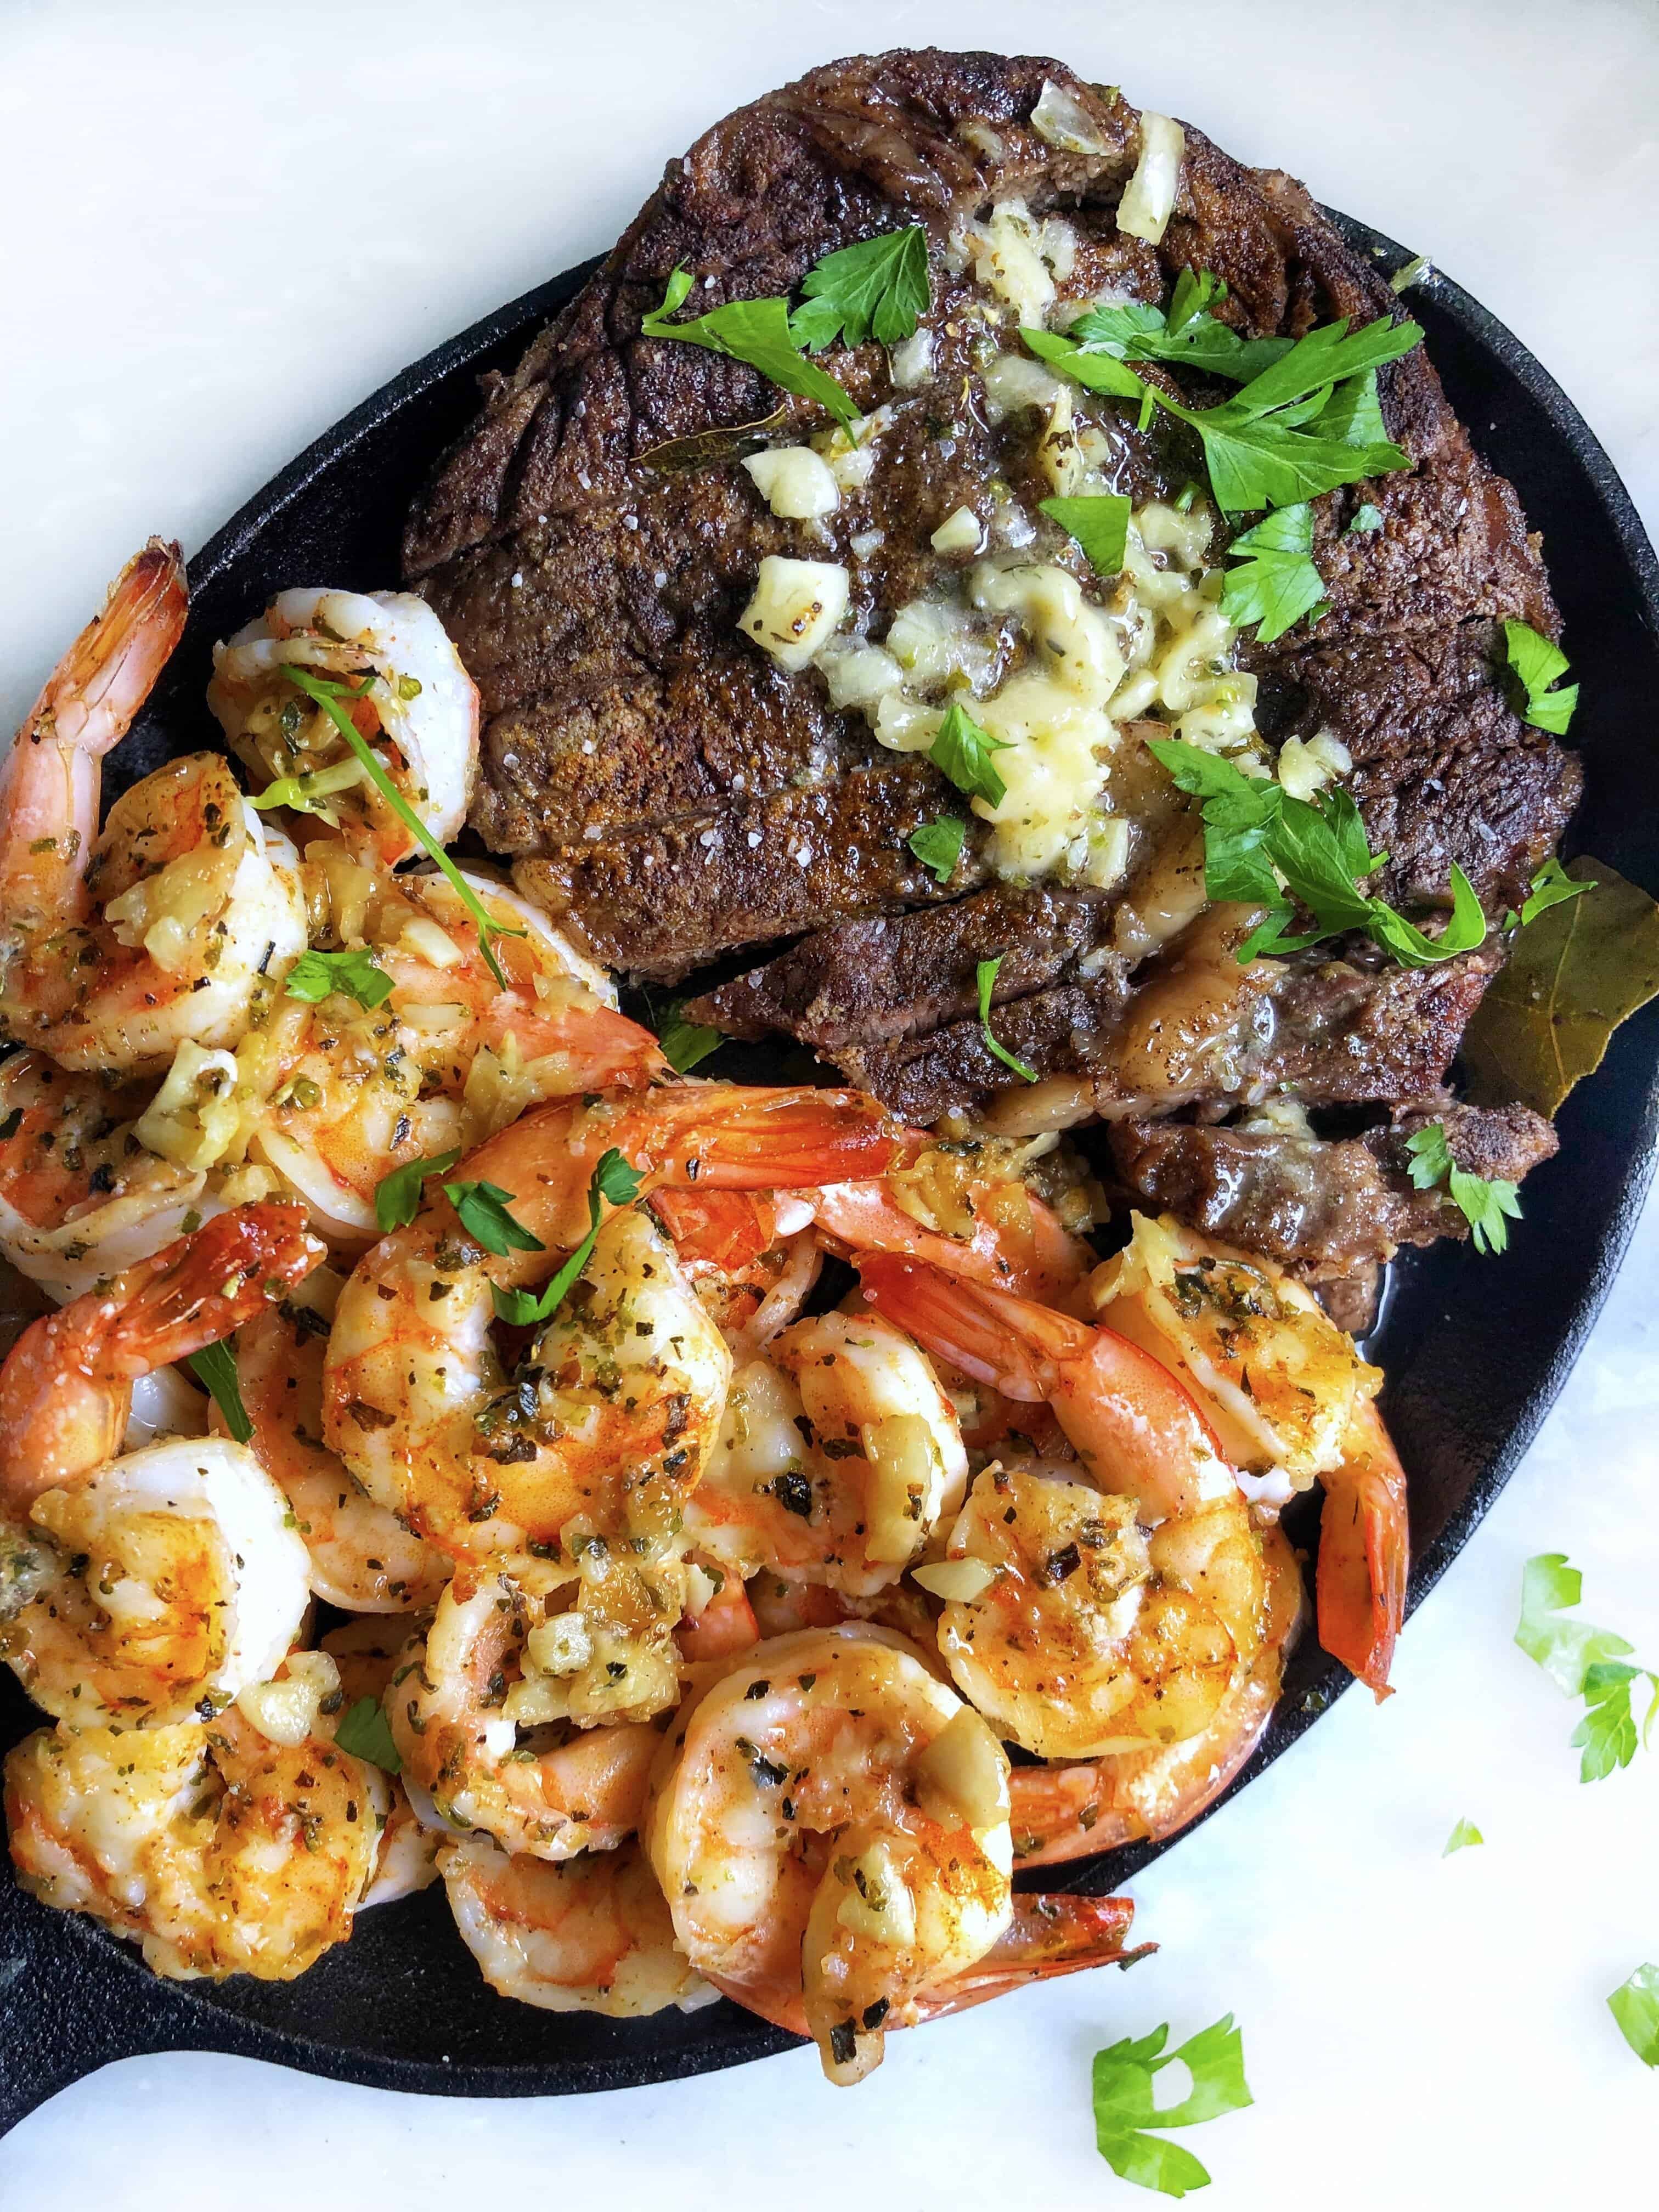 A black pan lays on a counter top. One half of the pan contains shrimp, the other half contains steak.